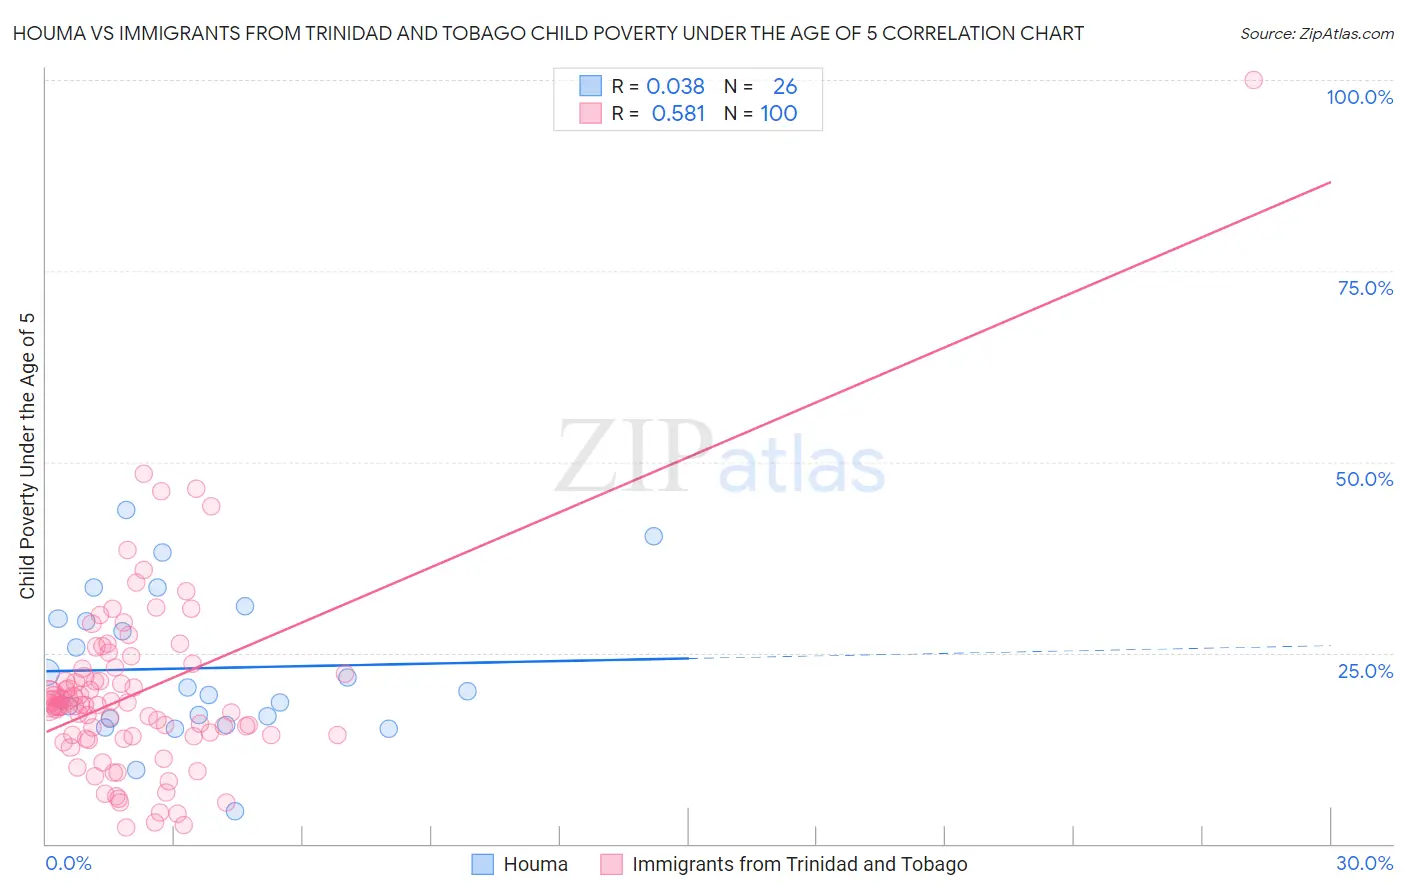 Houma vs Immigrants from Trinidad and Tobago Child Poverty Under the Age of 5